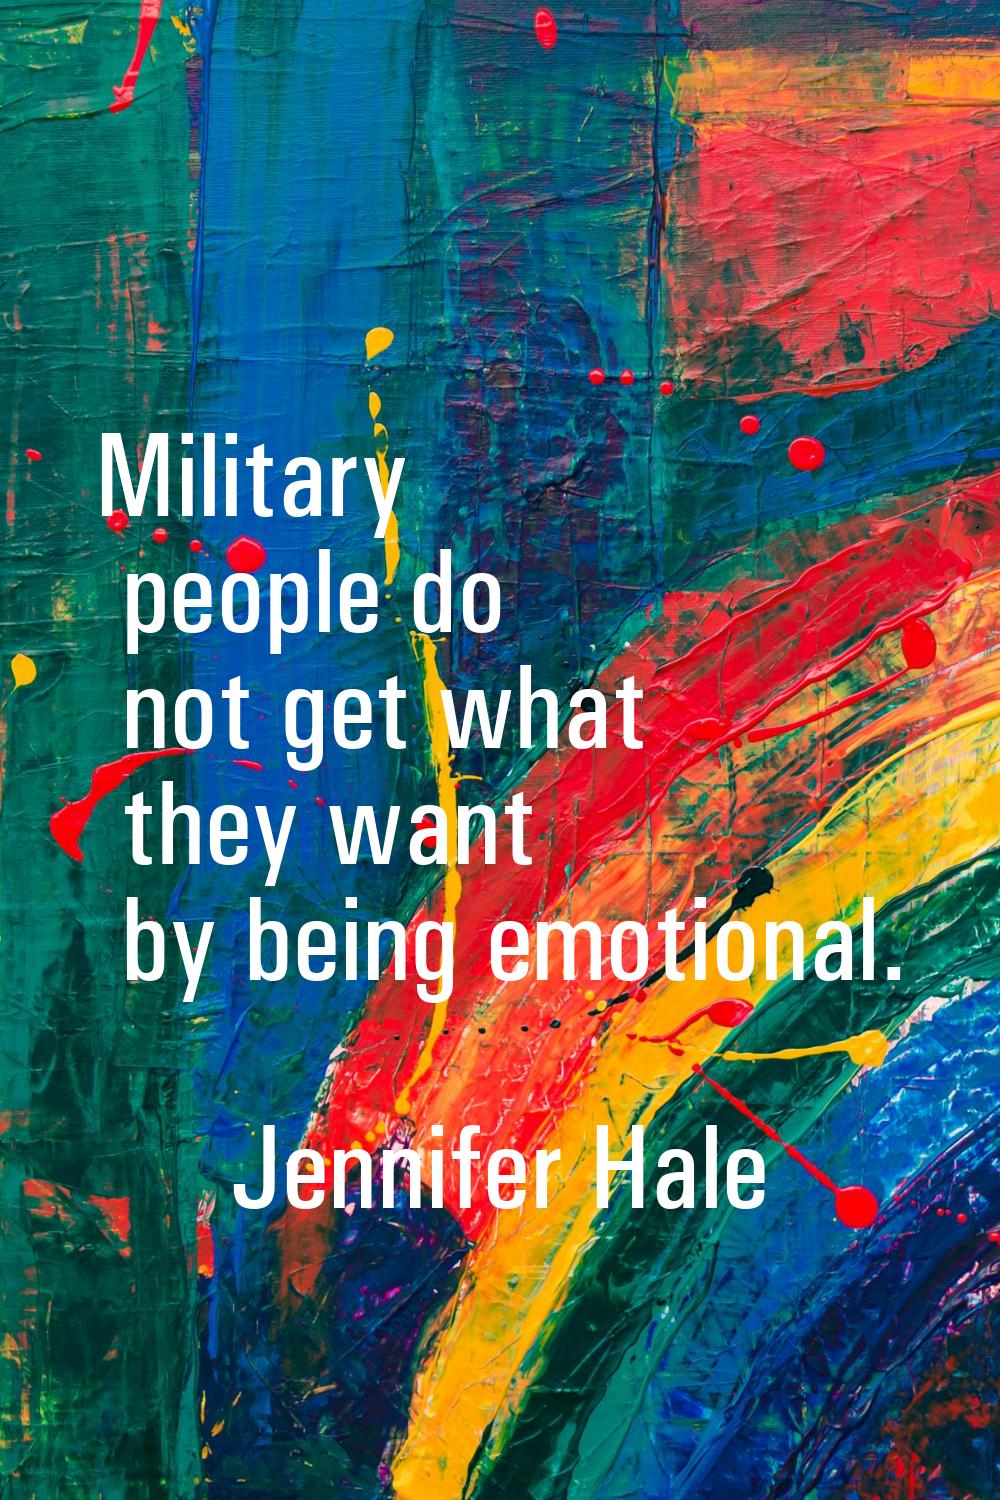 Military people do not get what they want by being emotional.